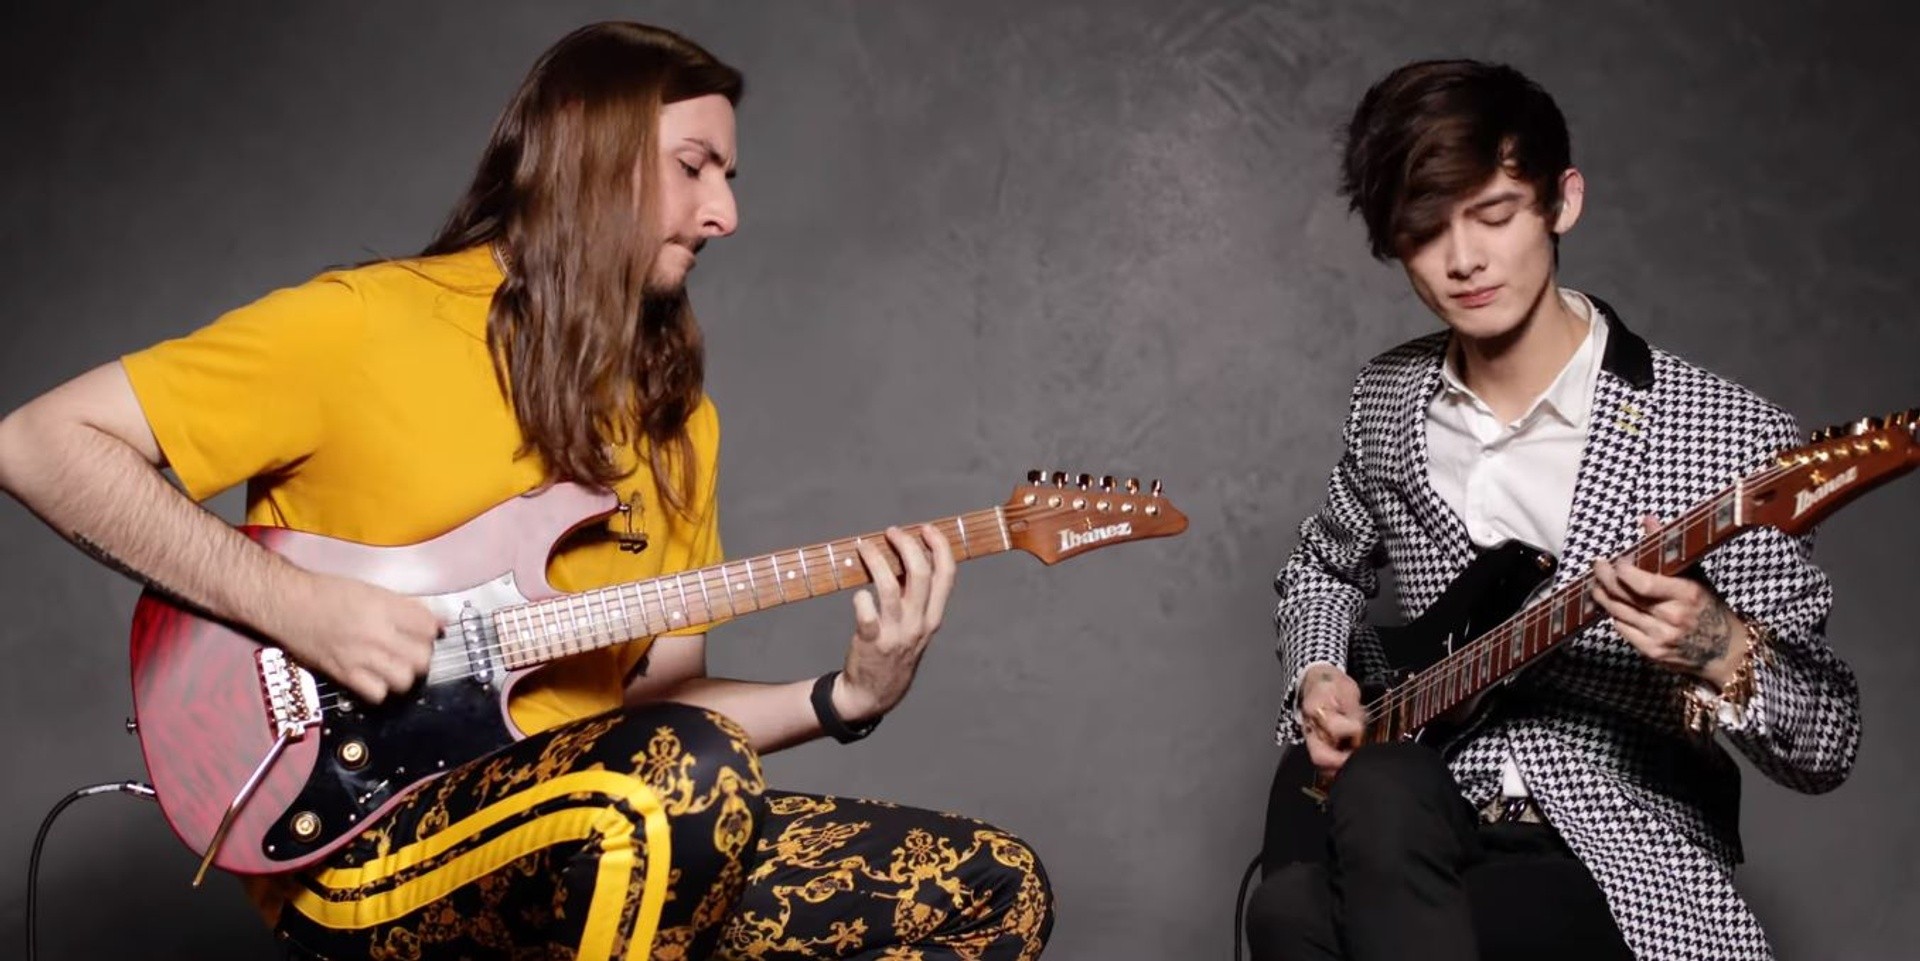 Polyphia demo their signature guitars and pickups – watch